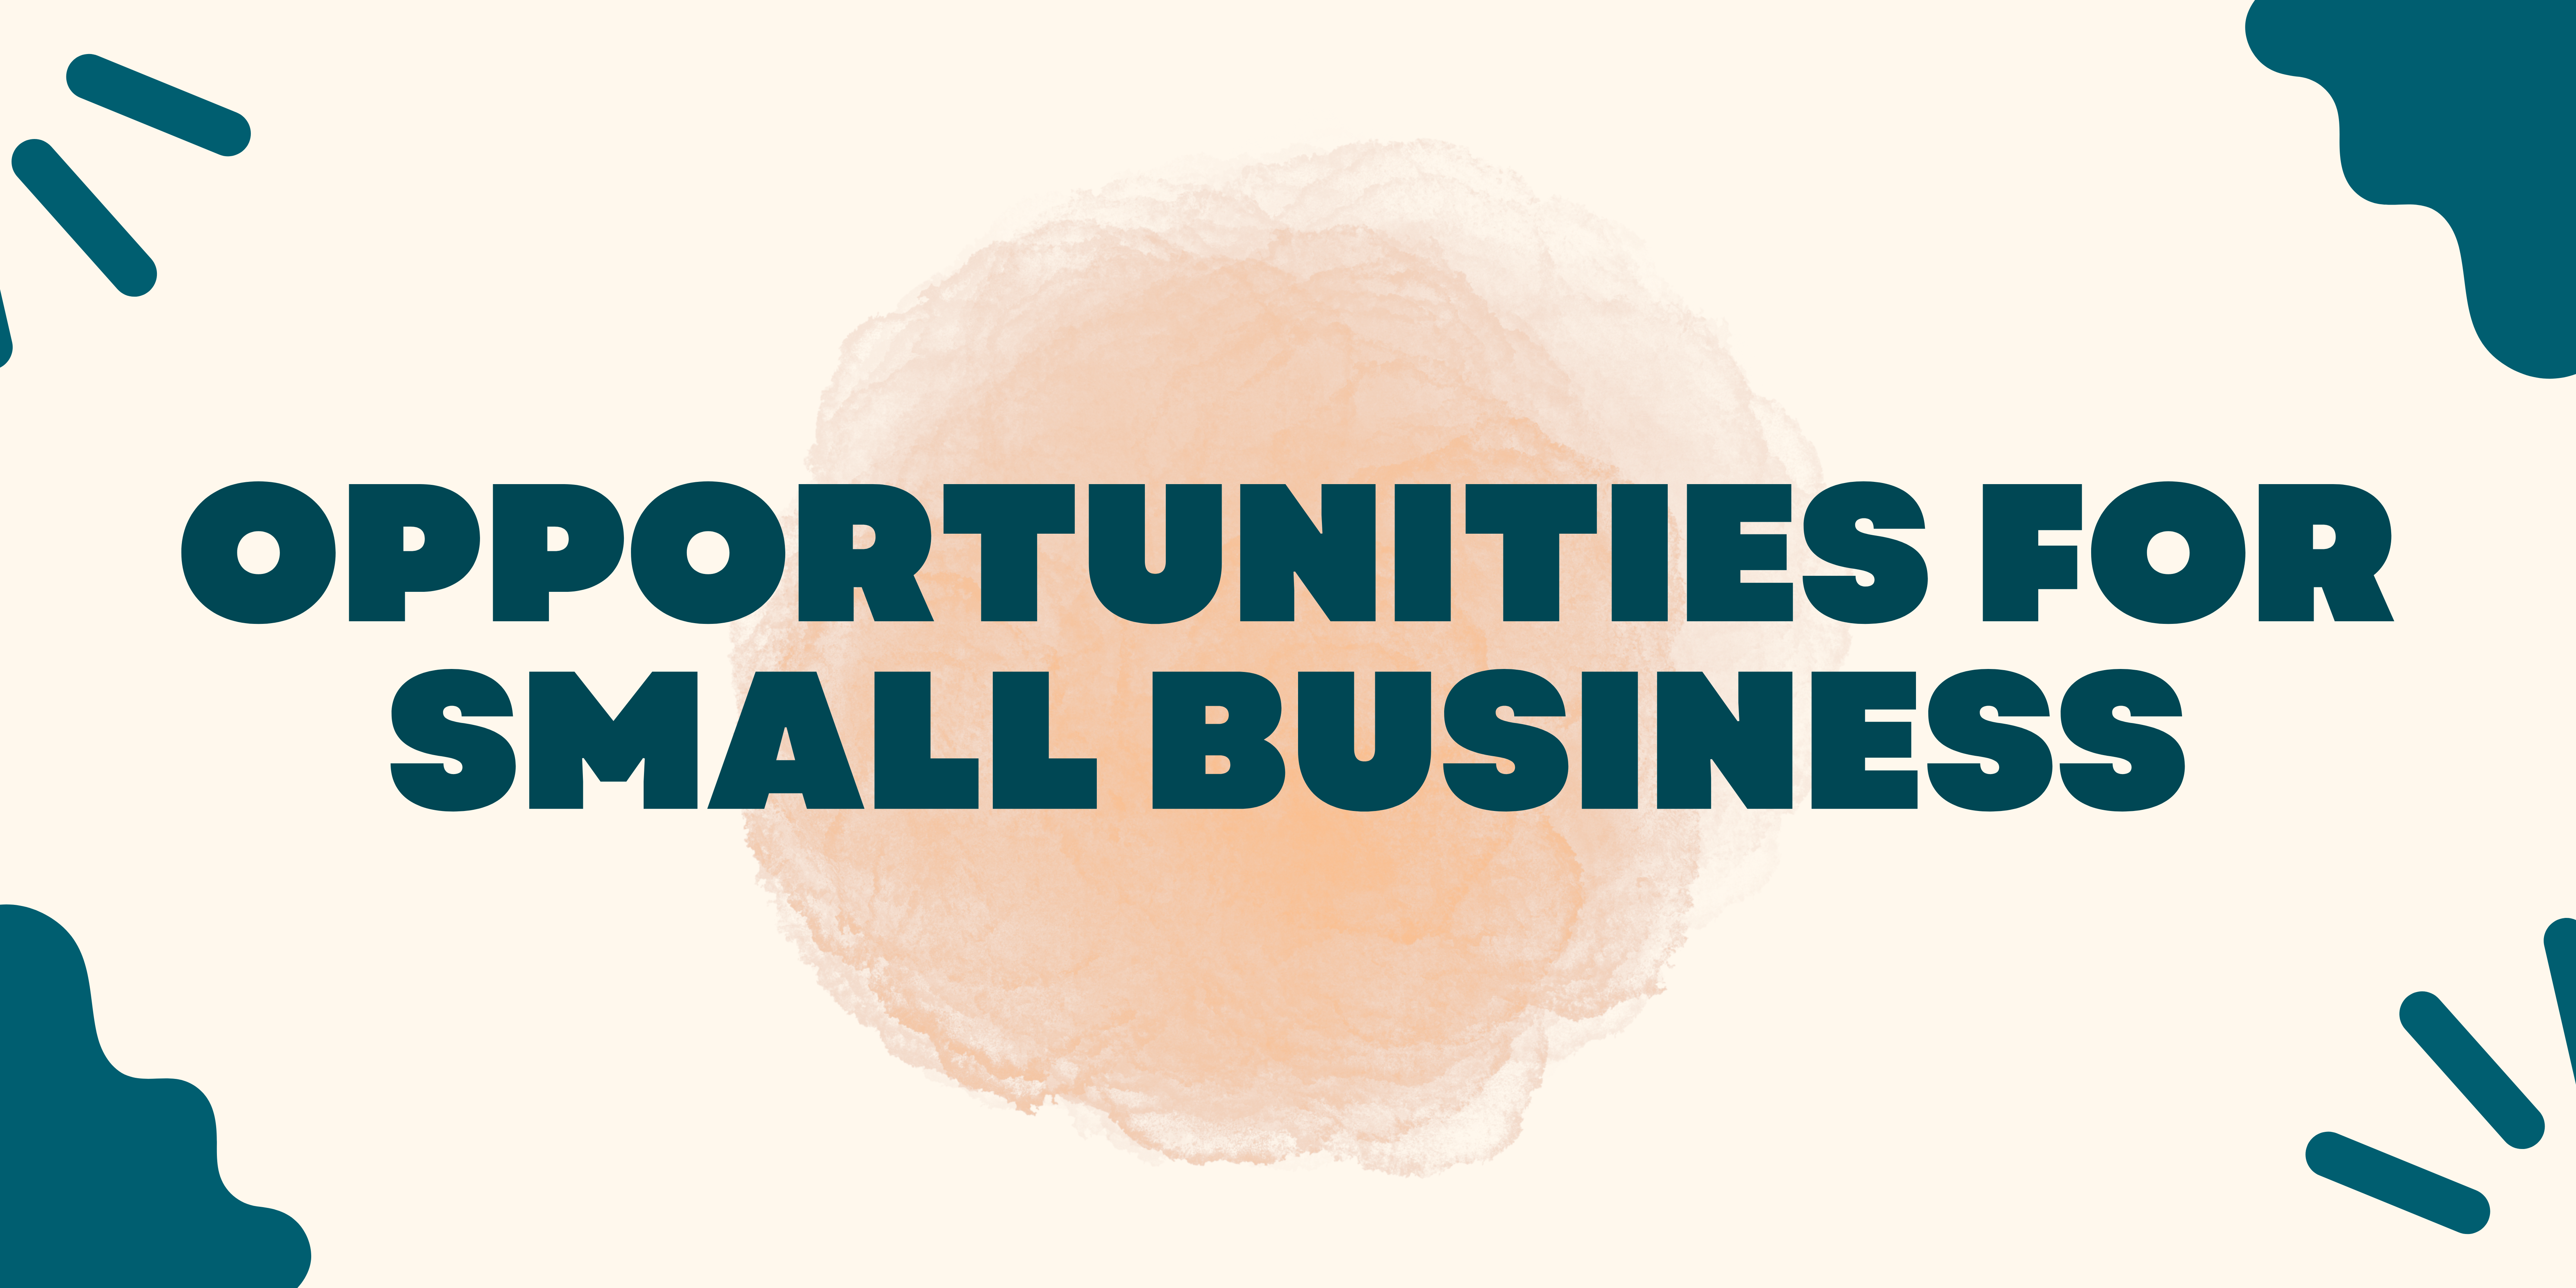 Opportunities for small business to grow their business online